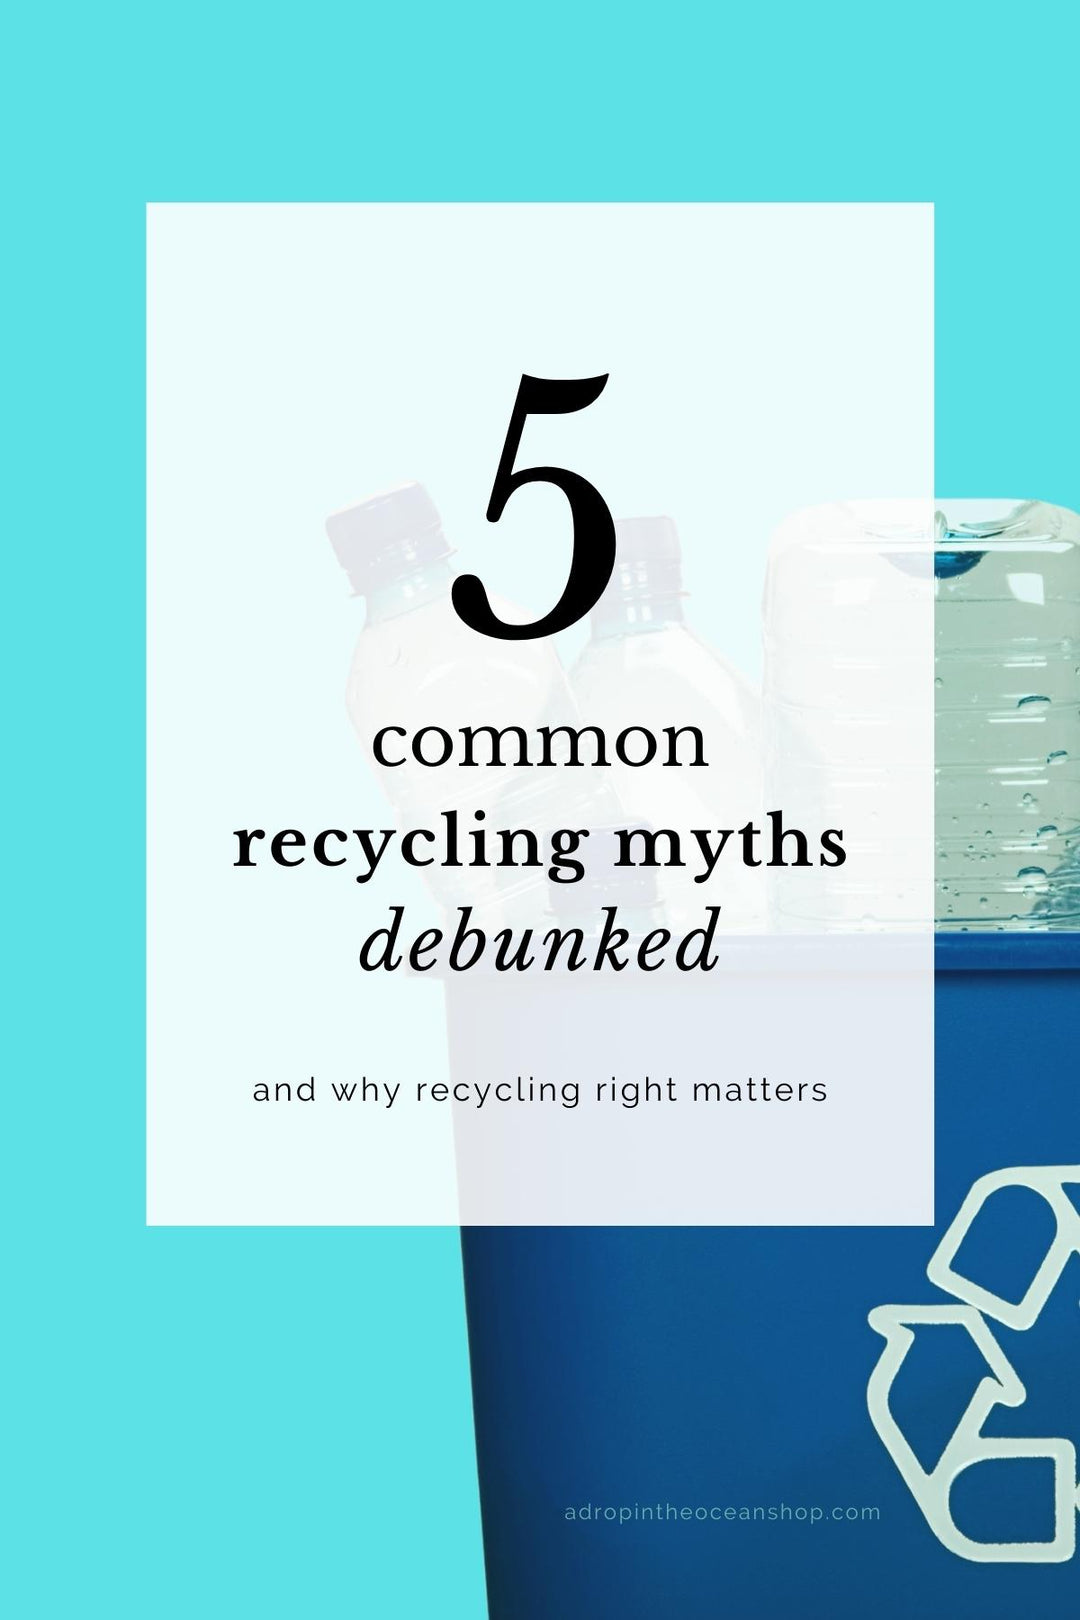 A Drop in the Ocean Online Zero Waste Store Blog: 5 Common Recycling Myths Debunked